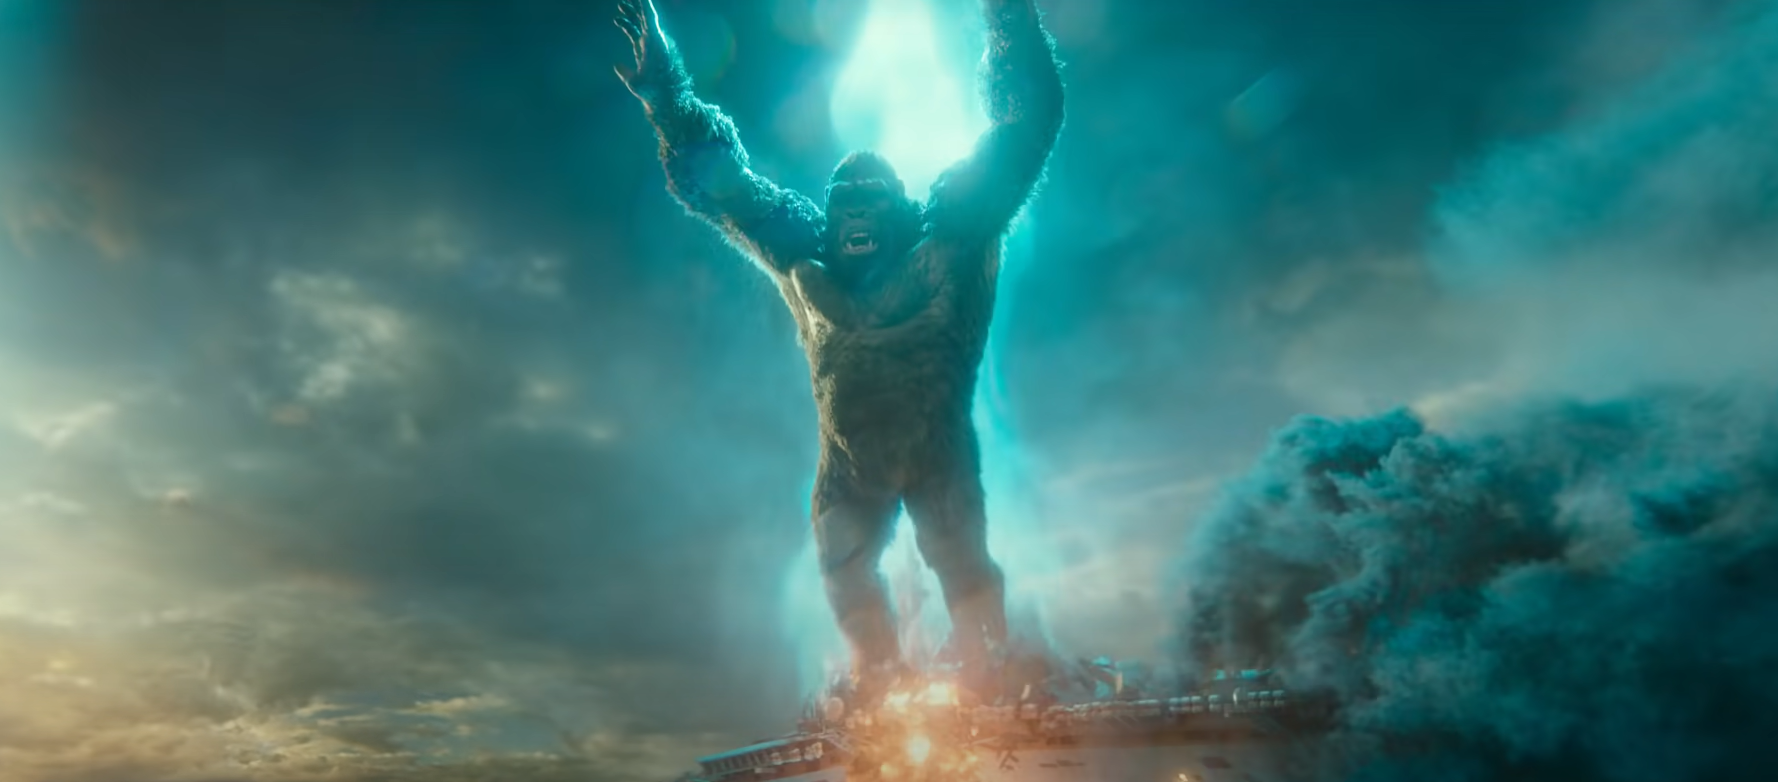 Kong leaps from a ship, backlit by Godzilla's atomic breath.